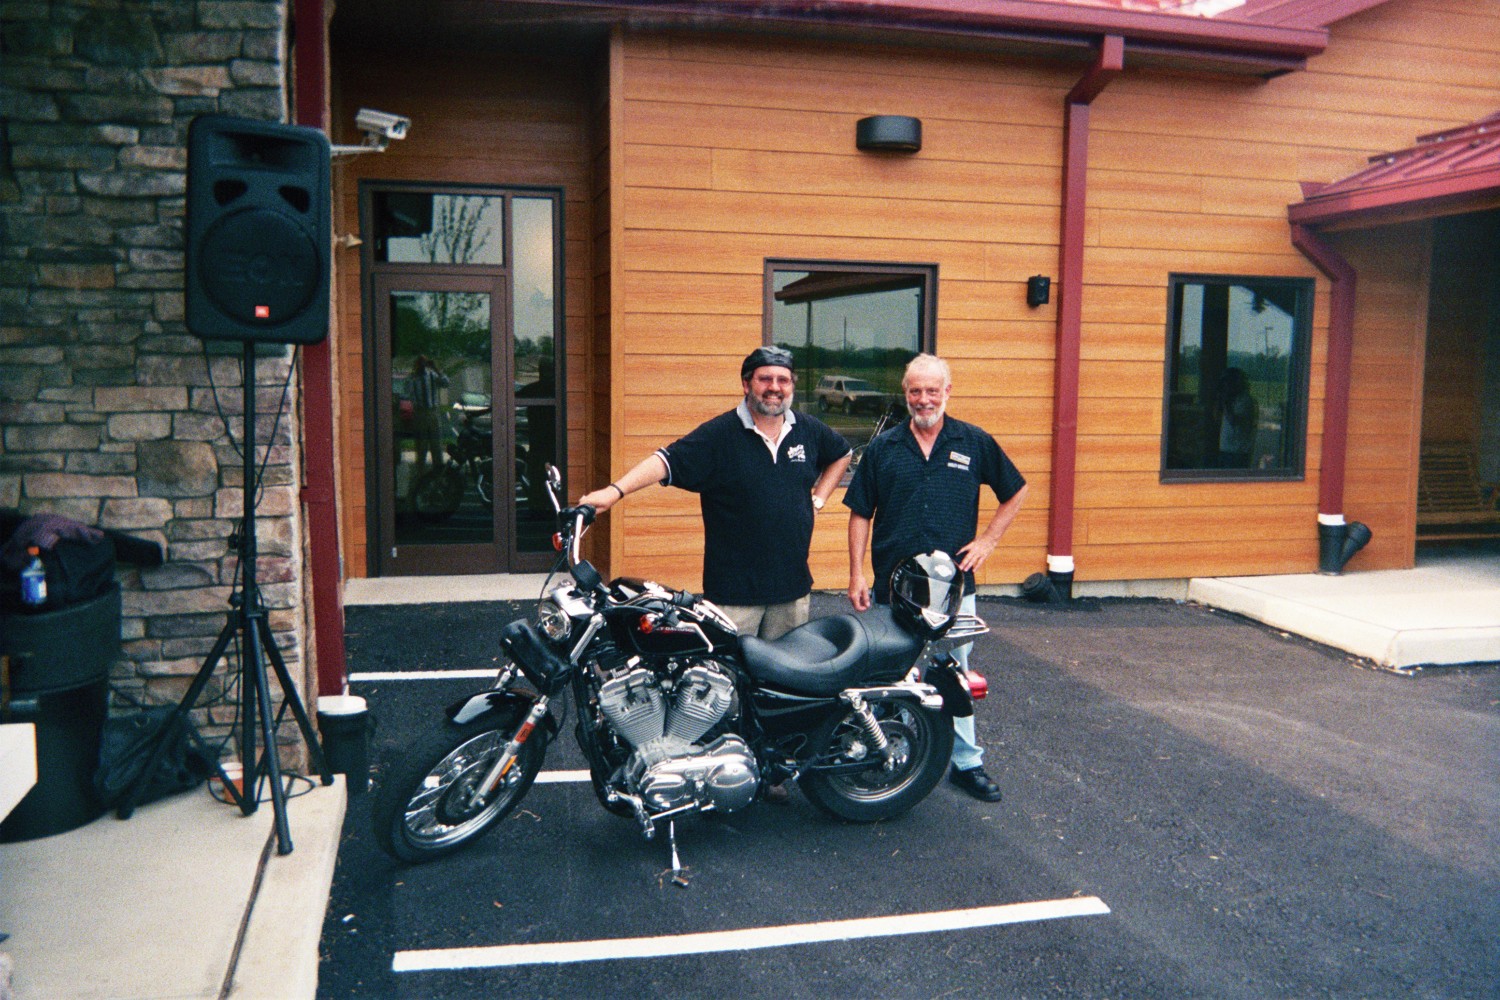 General manager Scott, Kirk and the Wise Guy 2005 Harley
Rode the bike to th Appalachian Harley Davidson show..and got drenched on the way home!
